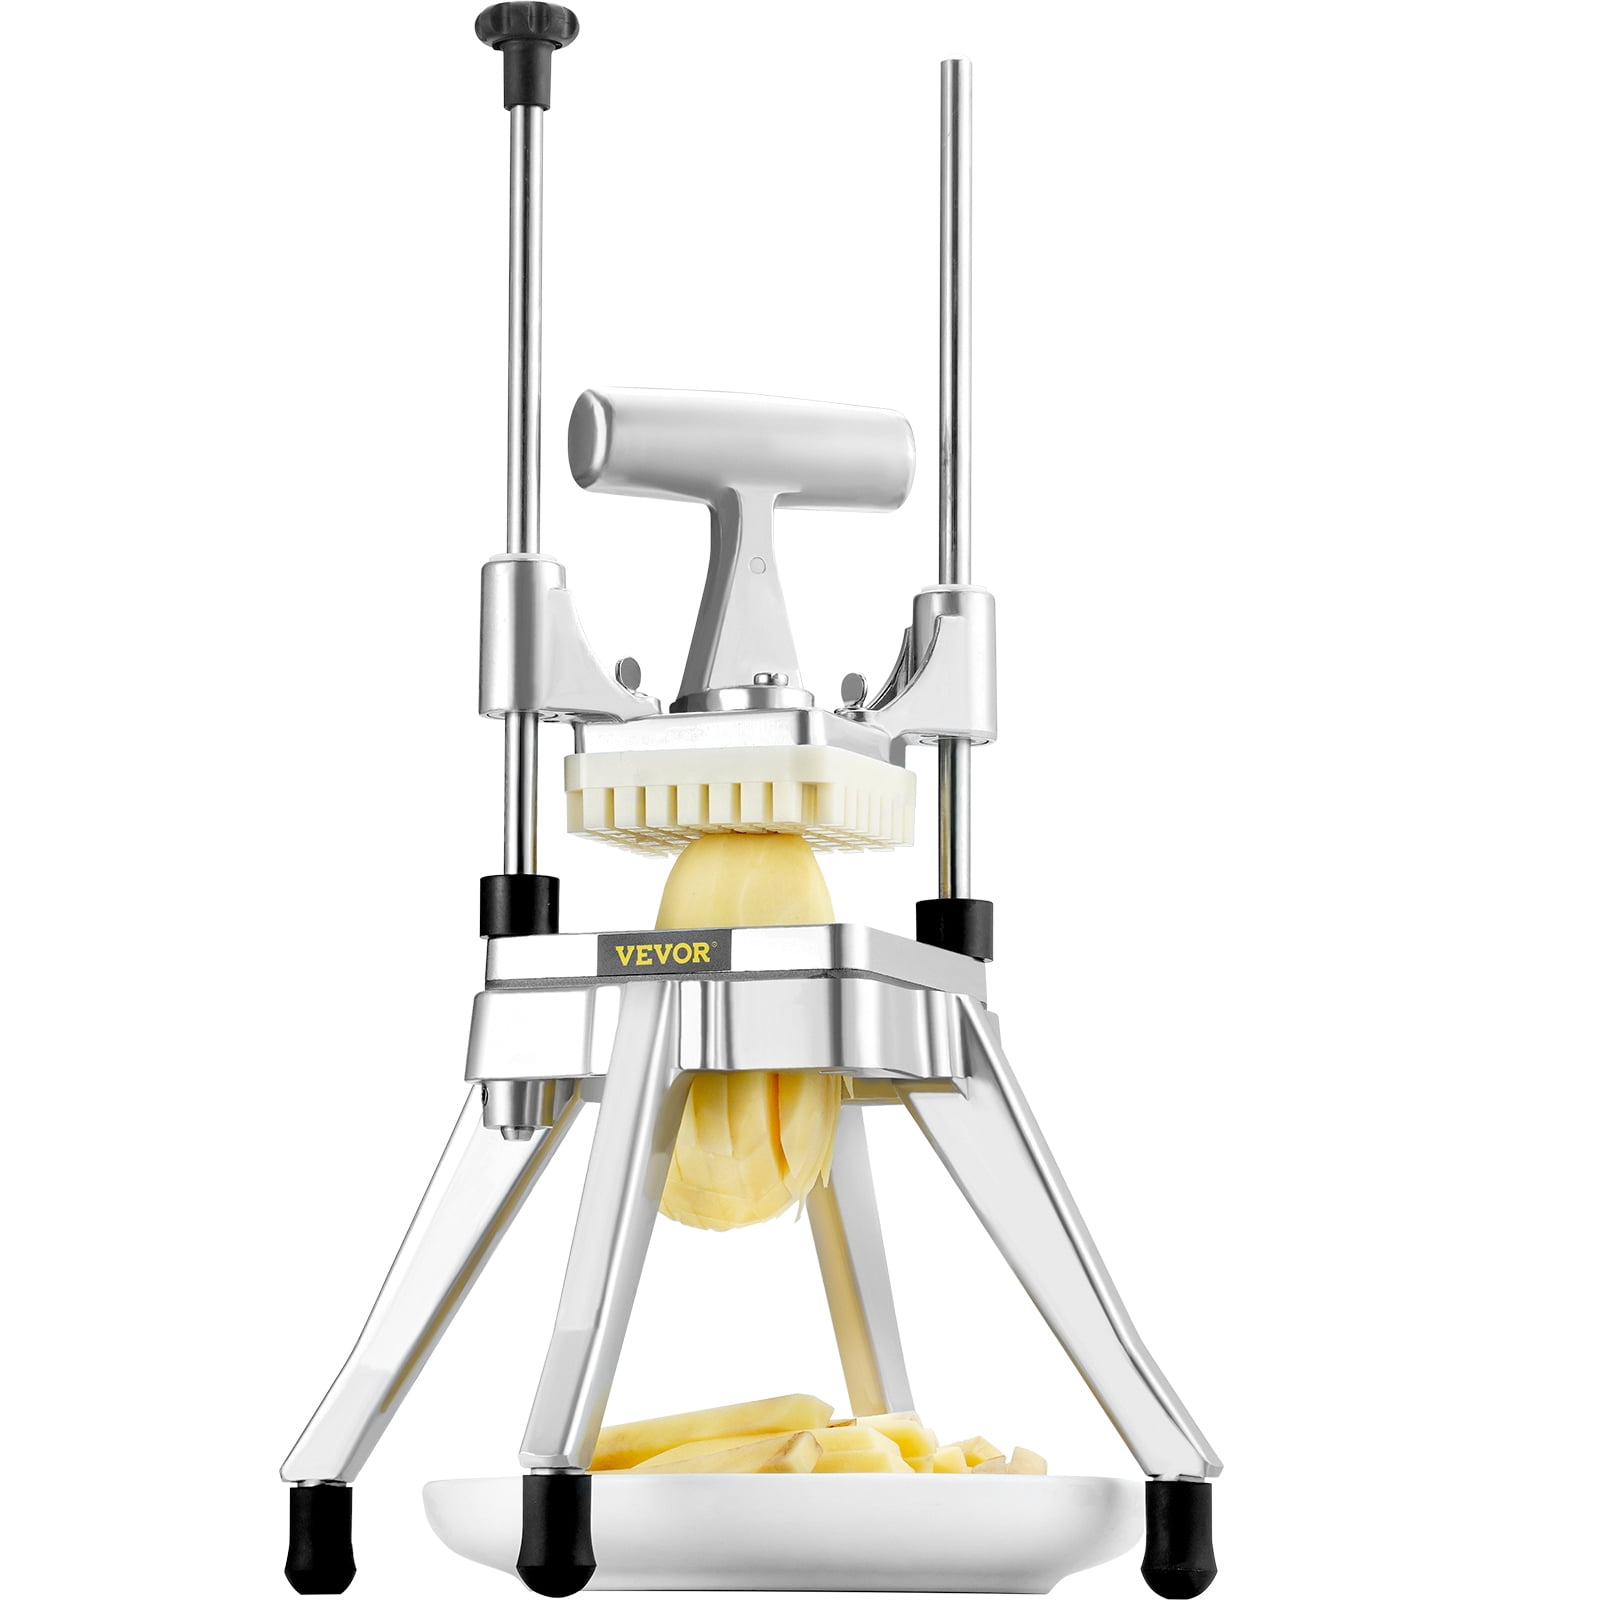 Commercial Onion Slicer With 3/8 Blades Stability Onion Chopper